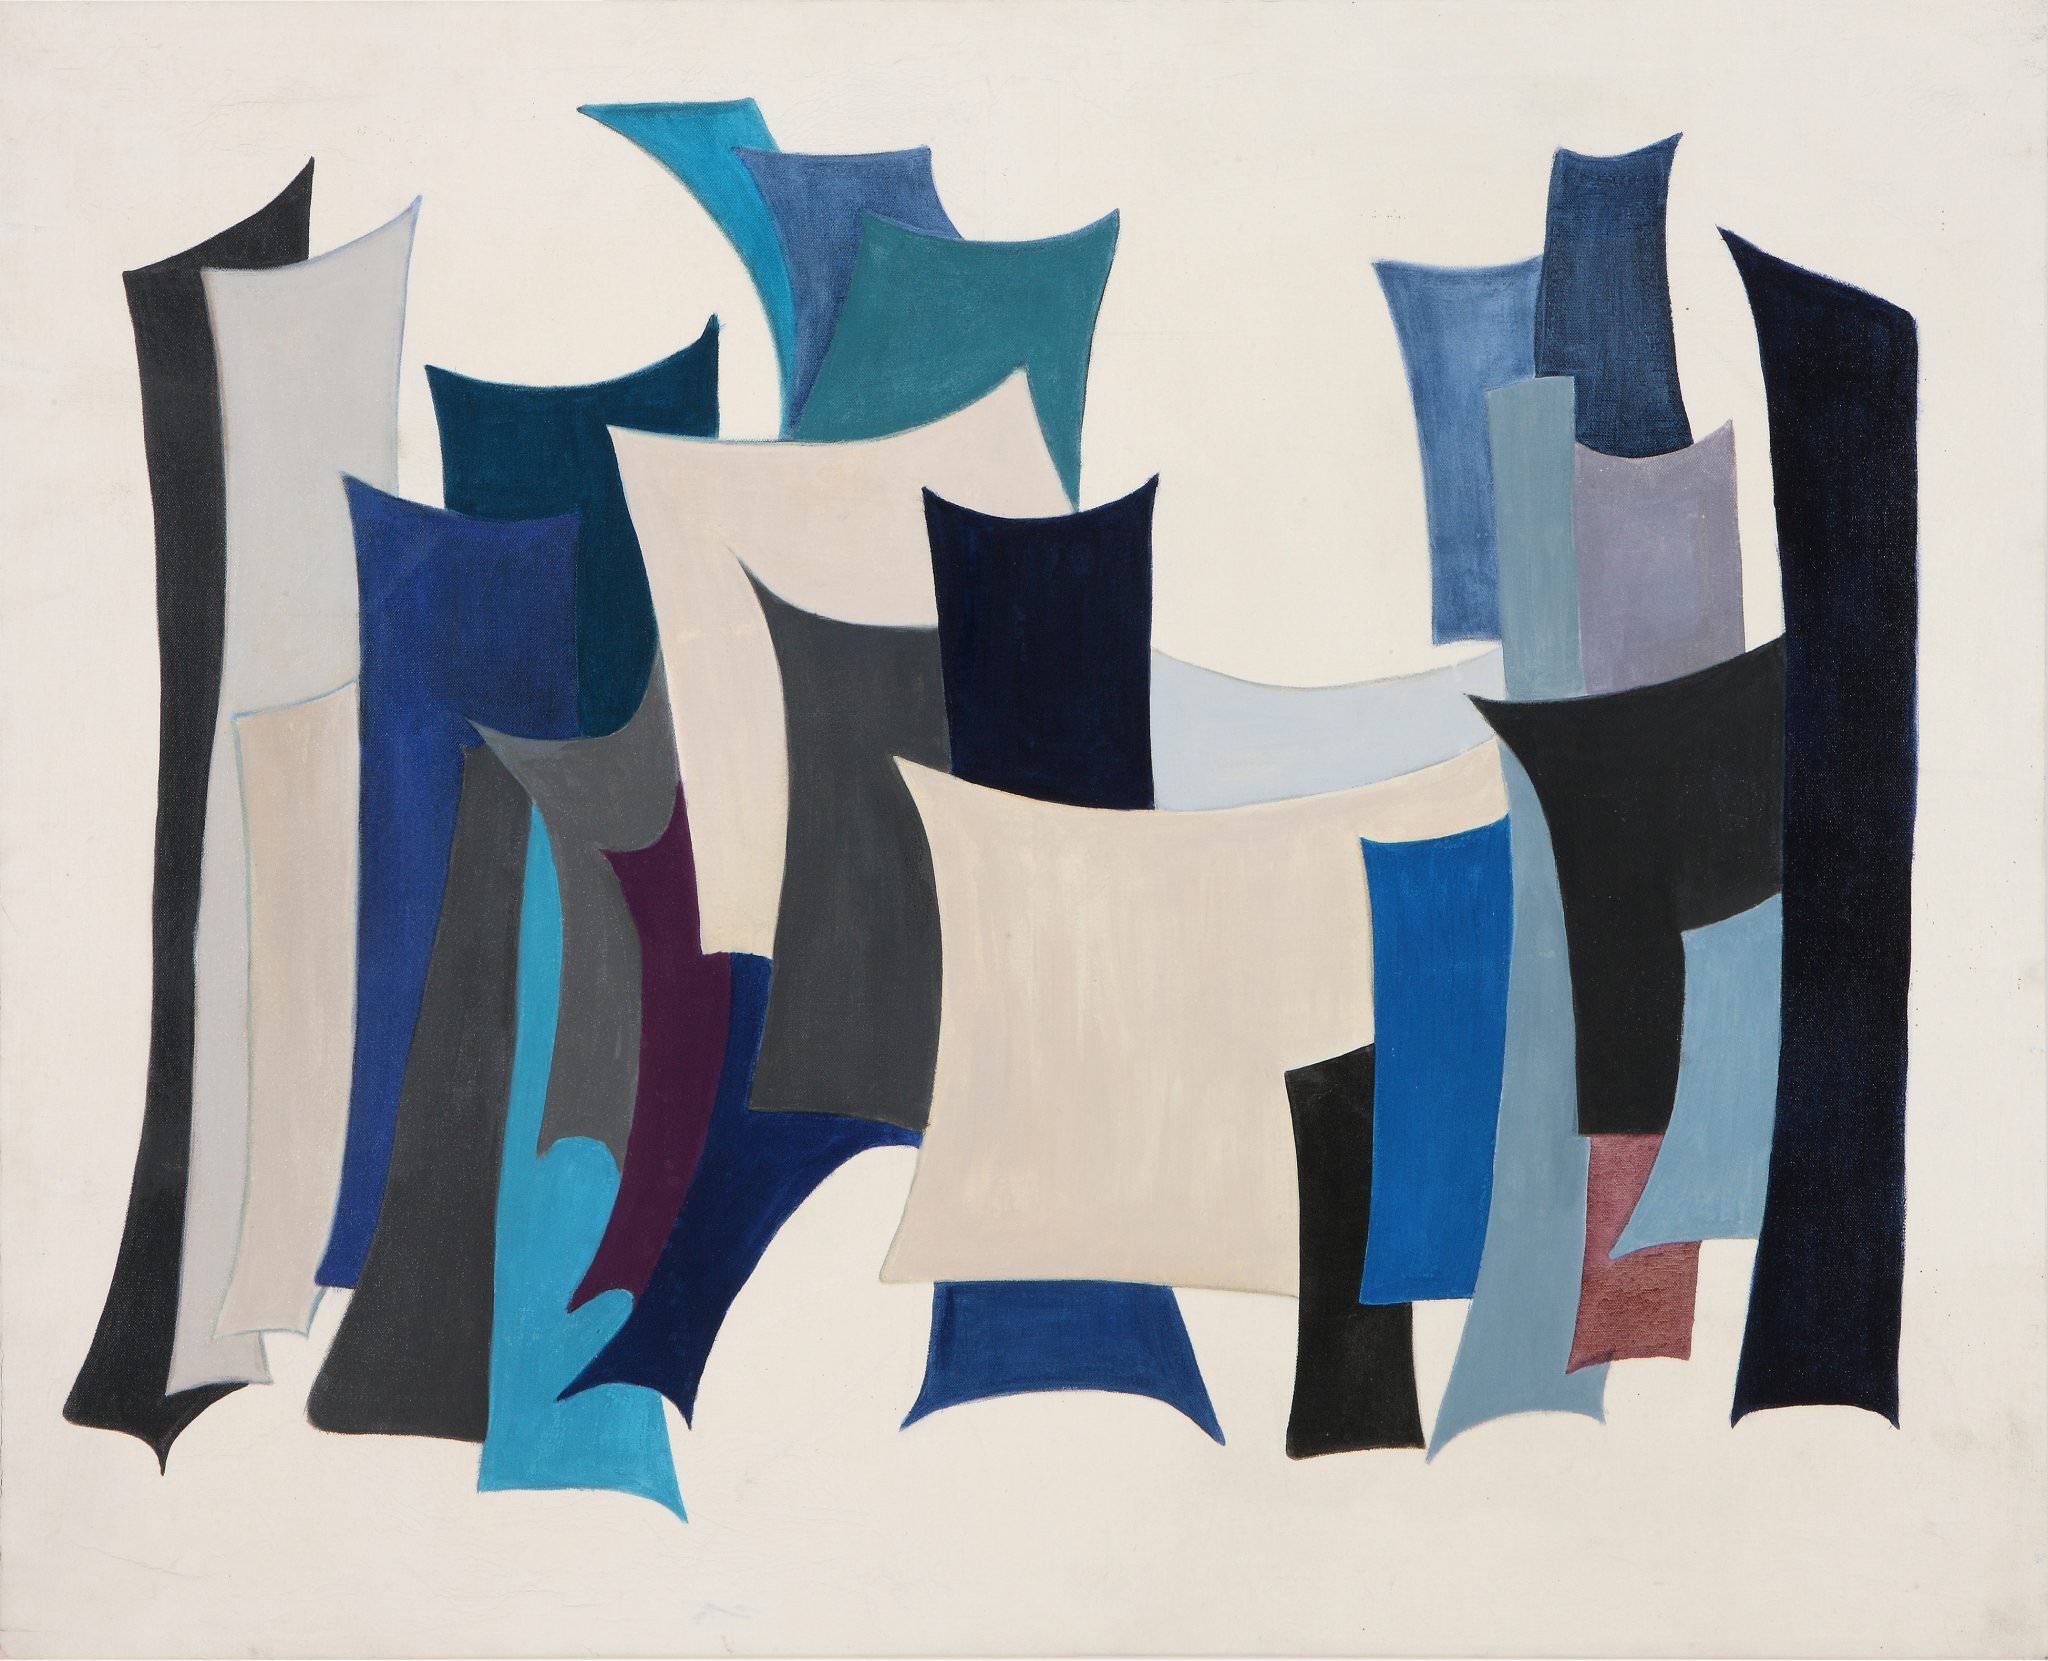 Huguette Caland (Lebanon), City II, 1968. Oil on canvas, 31 1/2 x 39 3/8 in. Collection of the Barjeel Art Foundation, Sharjah, UAE.